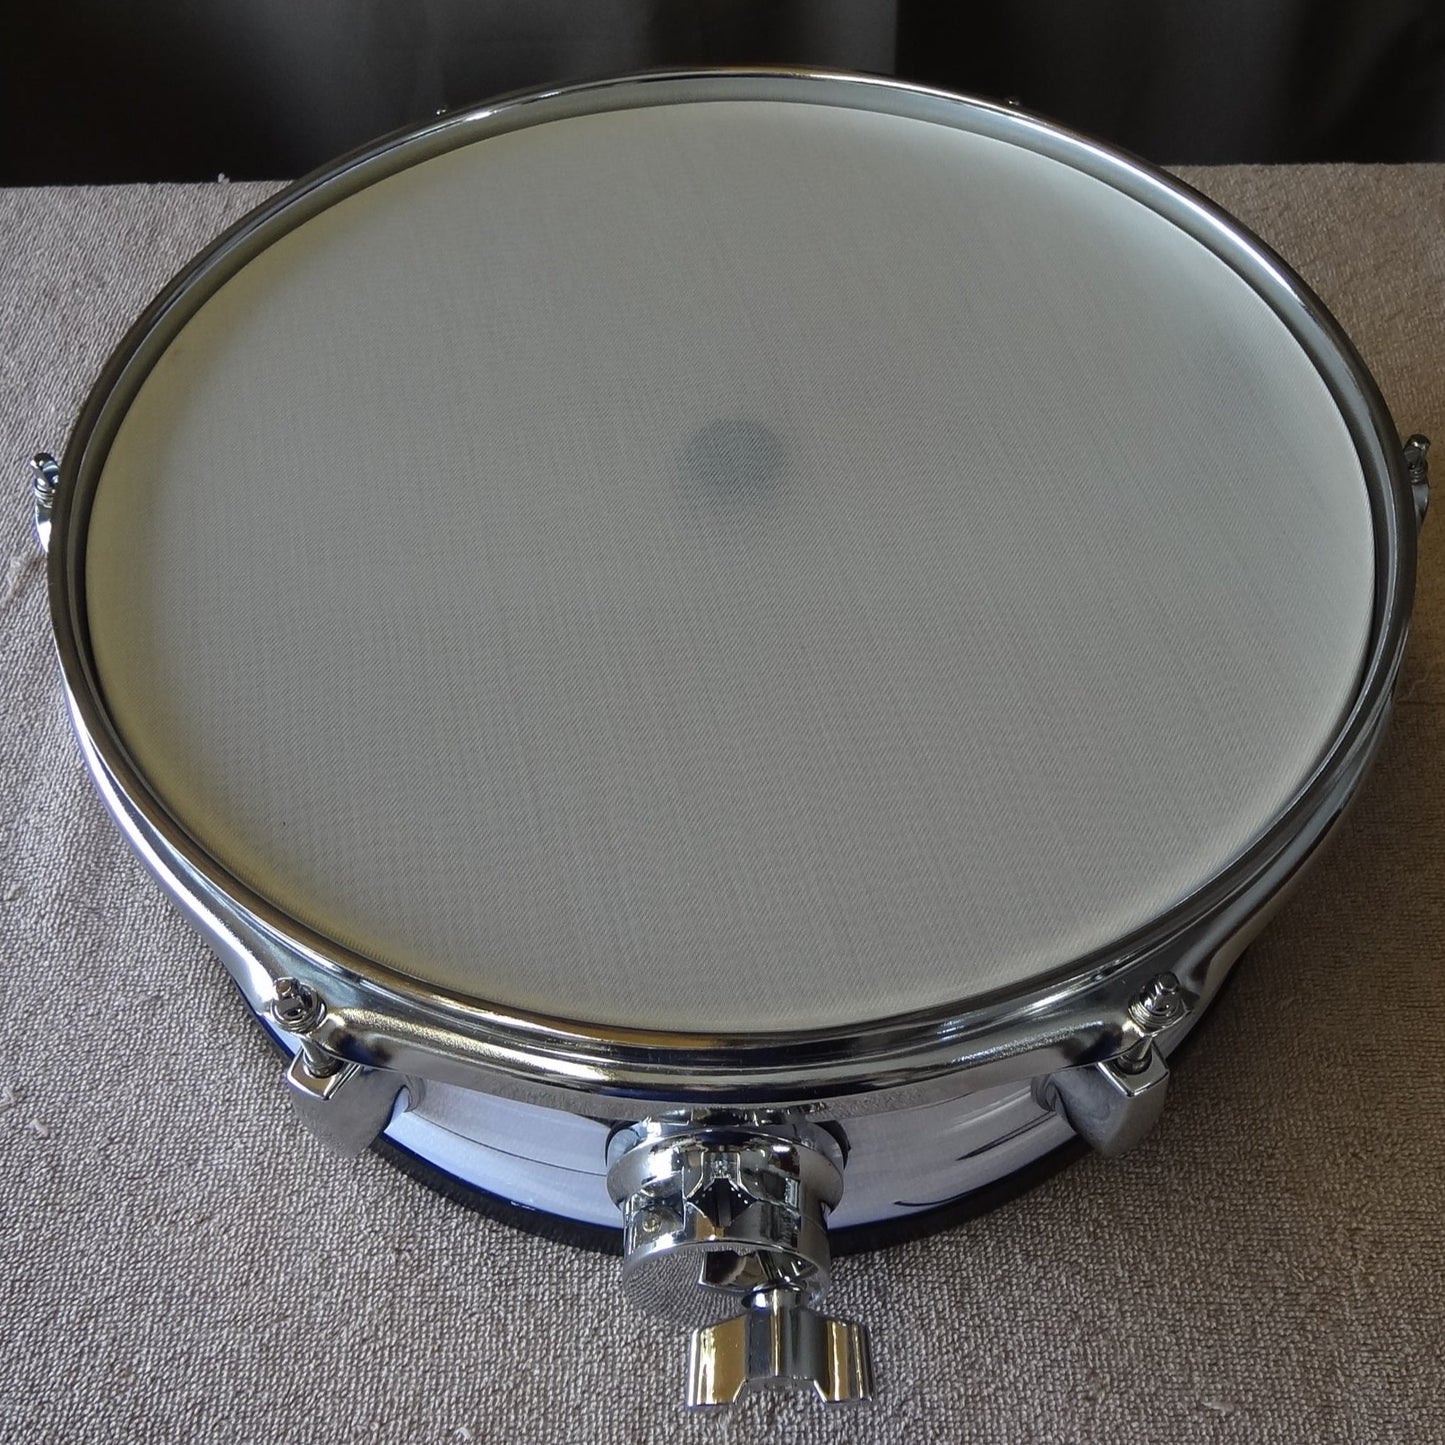 New 13 Inch Custom Electronic Snare Drum - White/Black